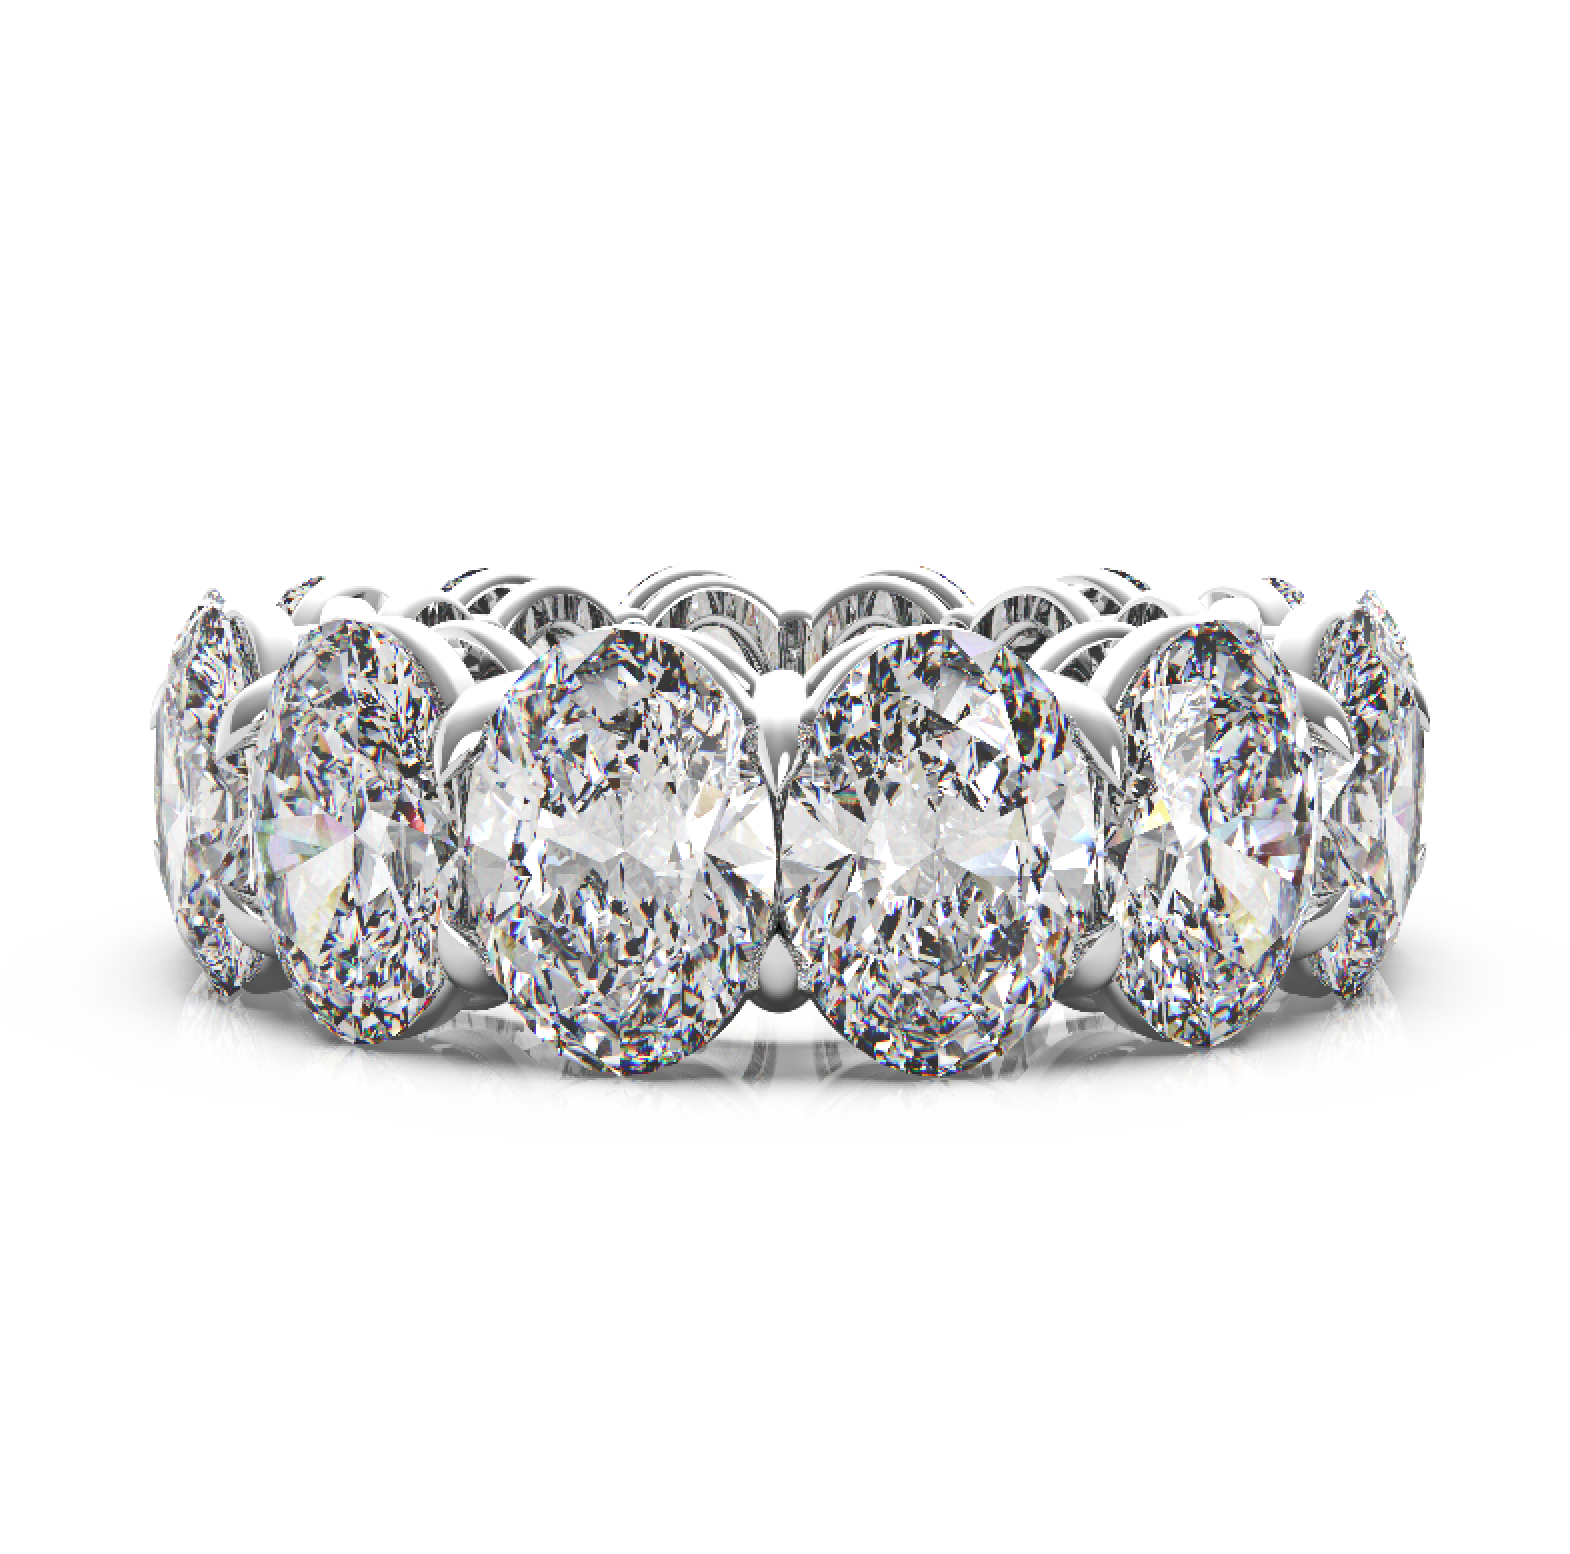 14 Carat Oval Cut Diamond Eternity Band in Platinum U Shape Shared Prong Front View